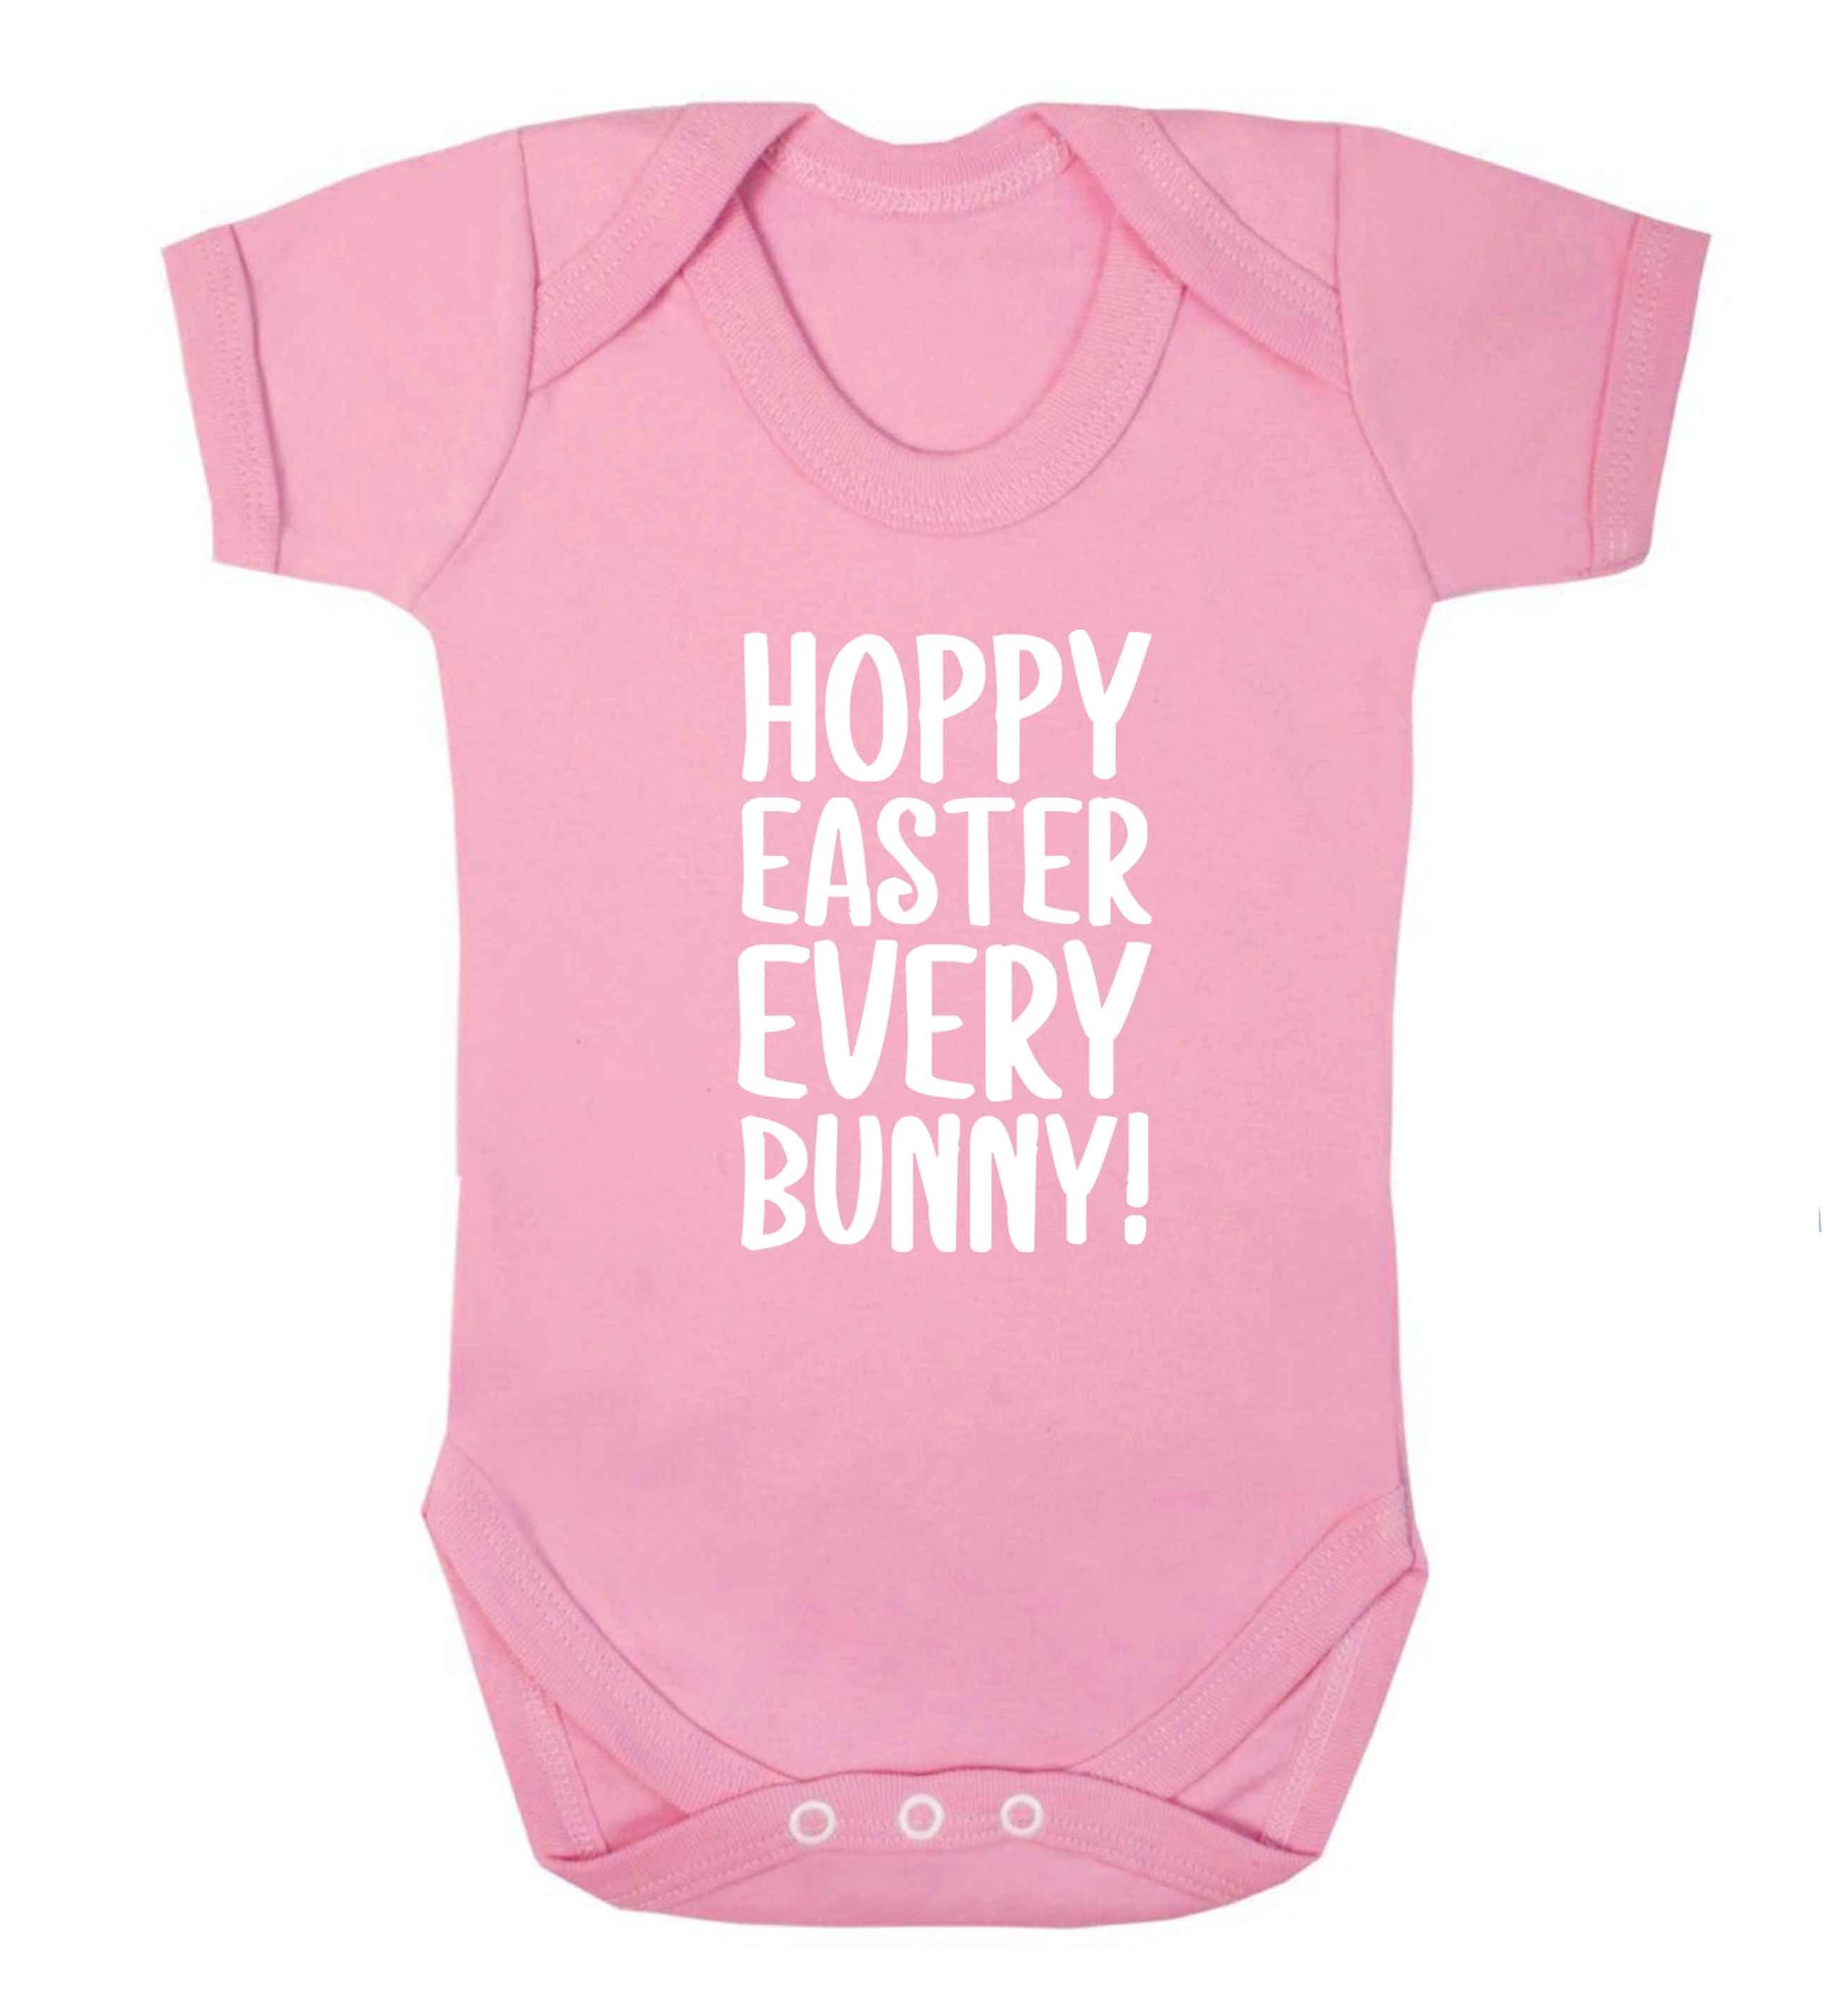 Hoppy Easter every bunny! baby vest pale pink 18-24 months